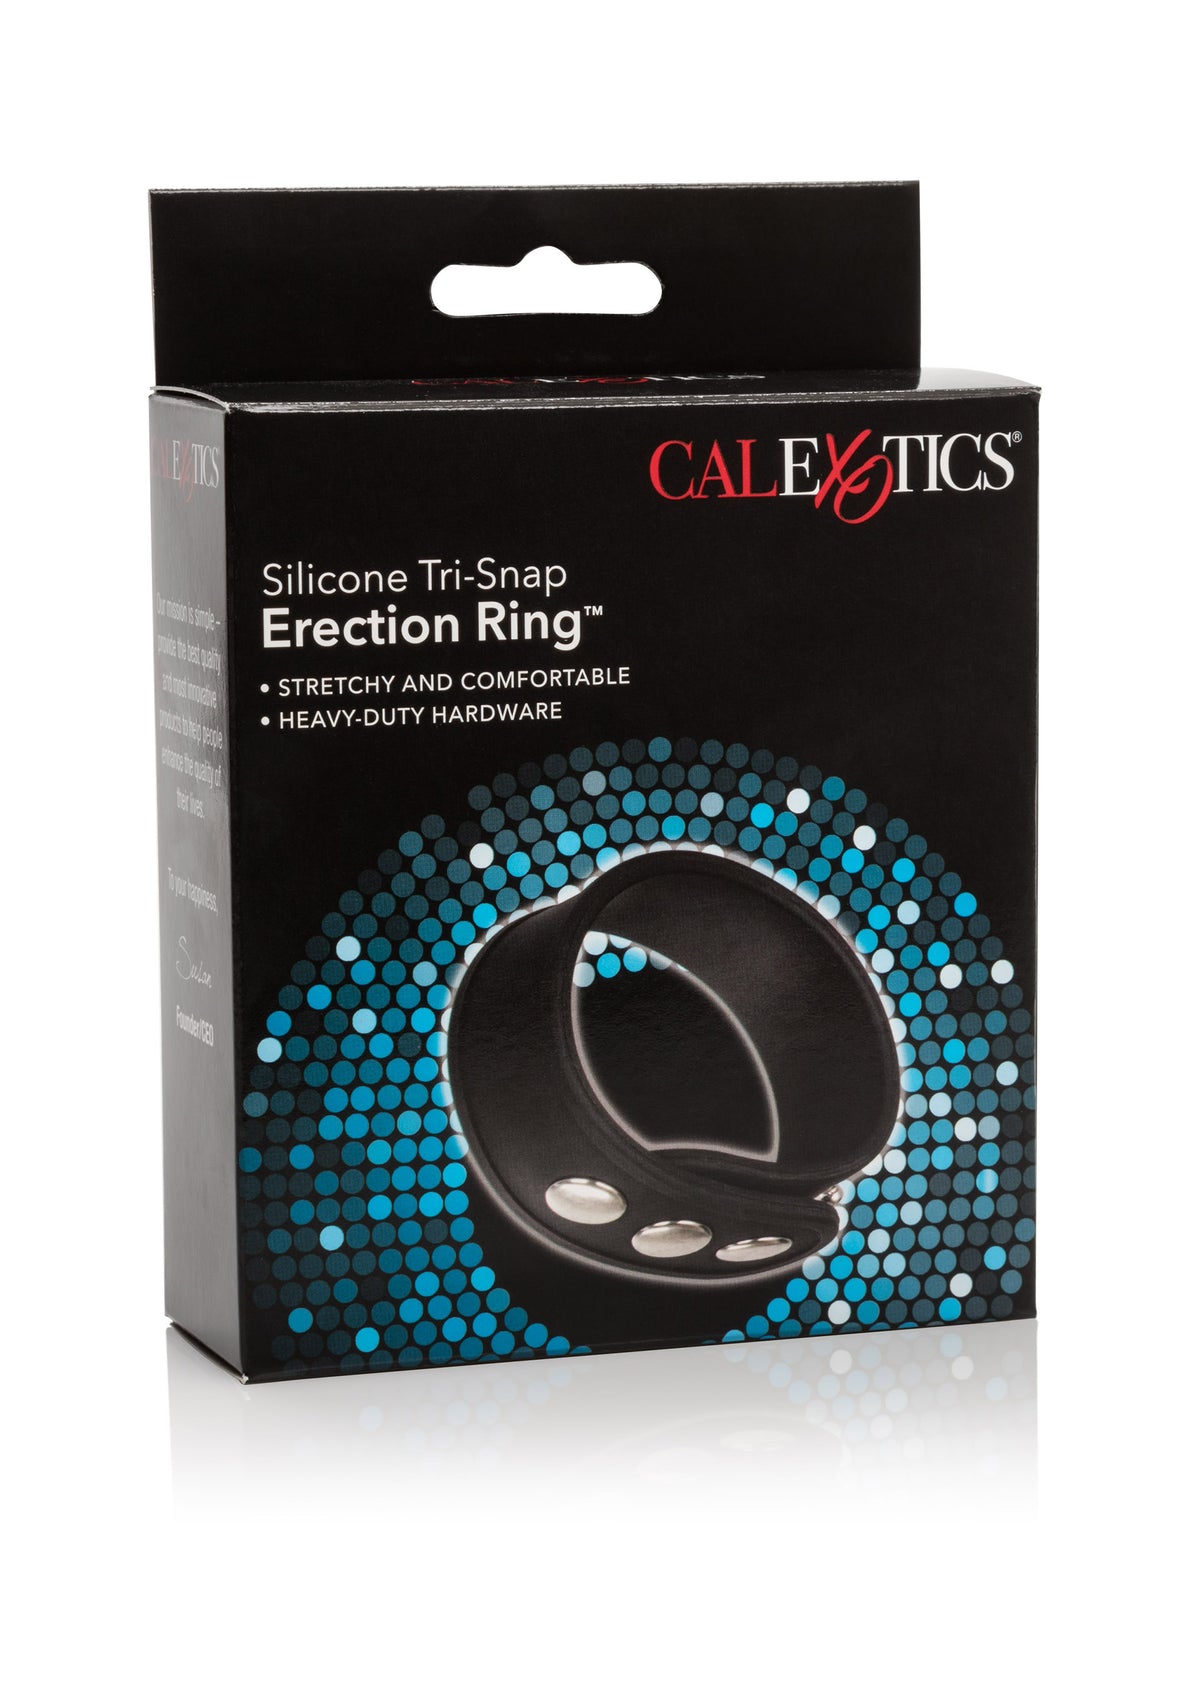 Silicone 3-Snap Erection Ring